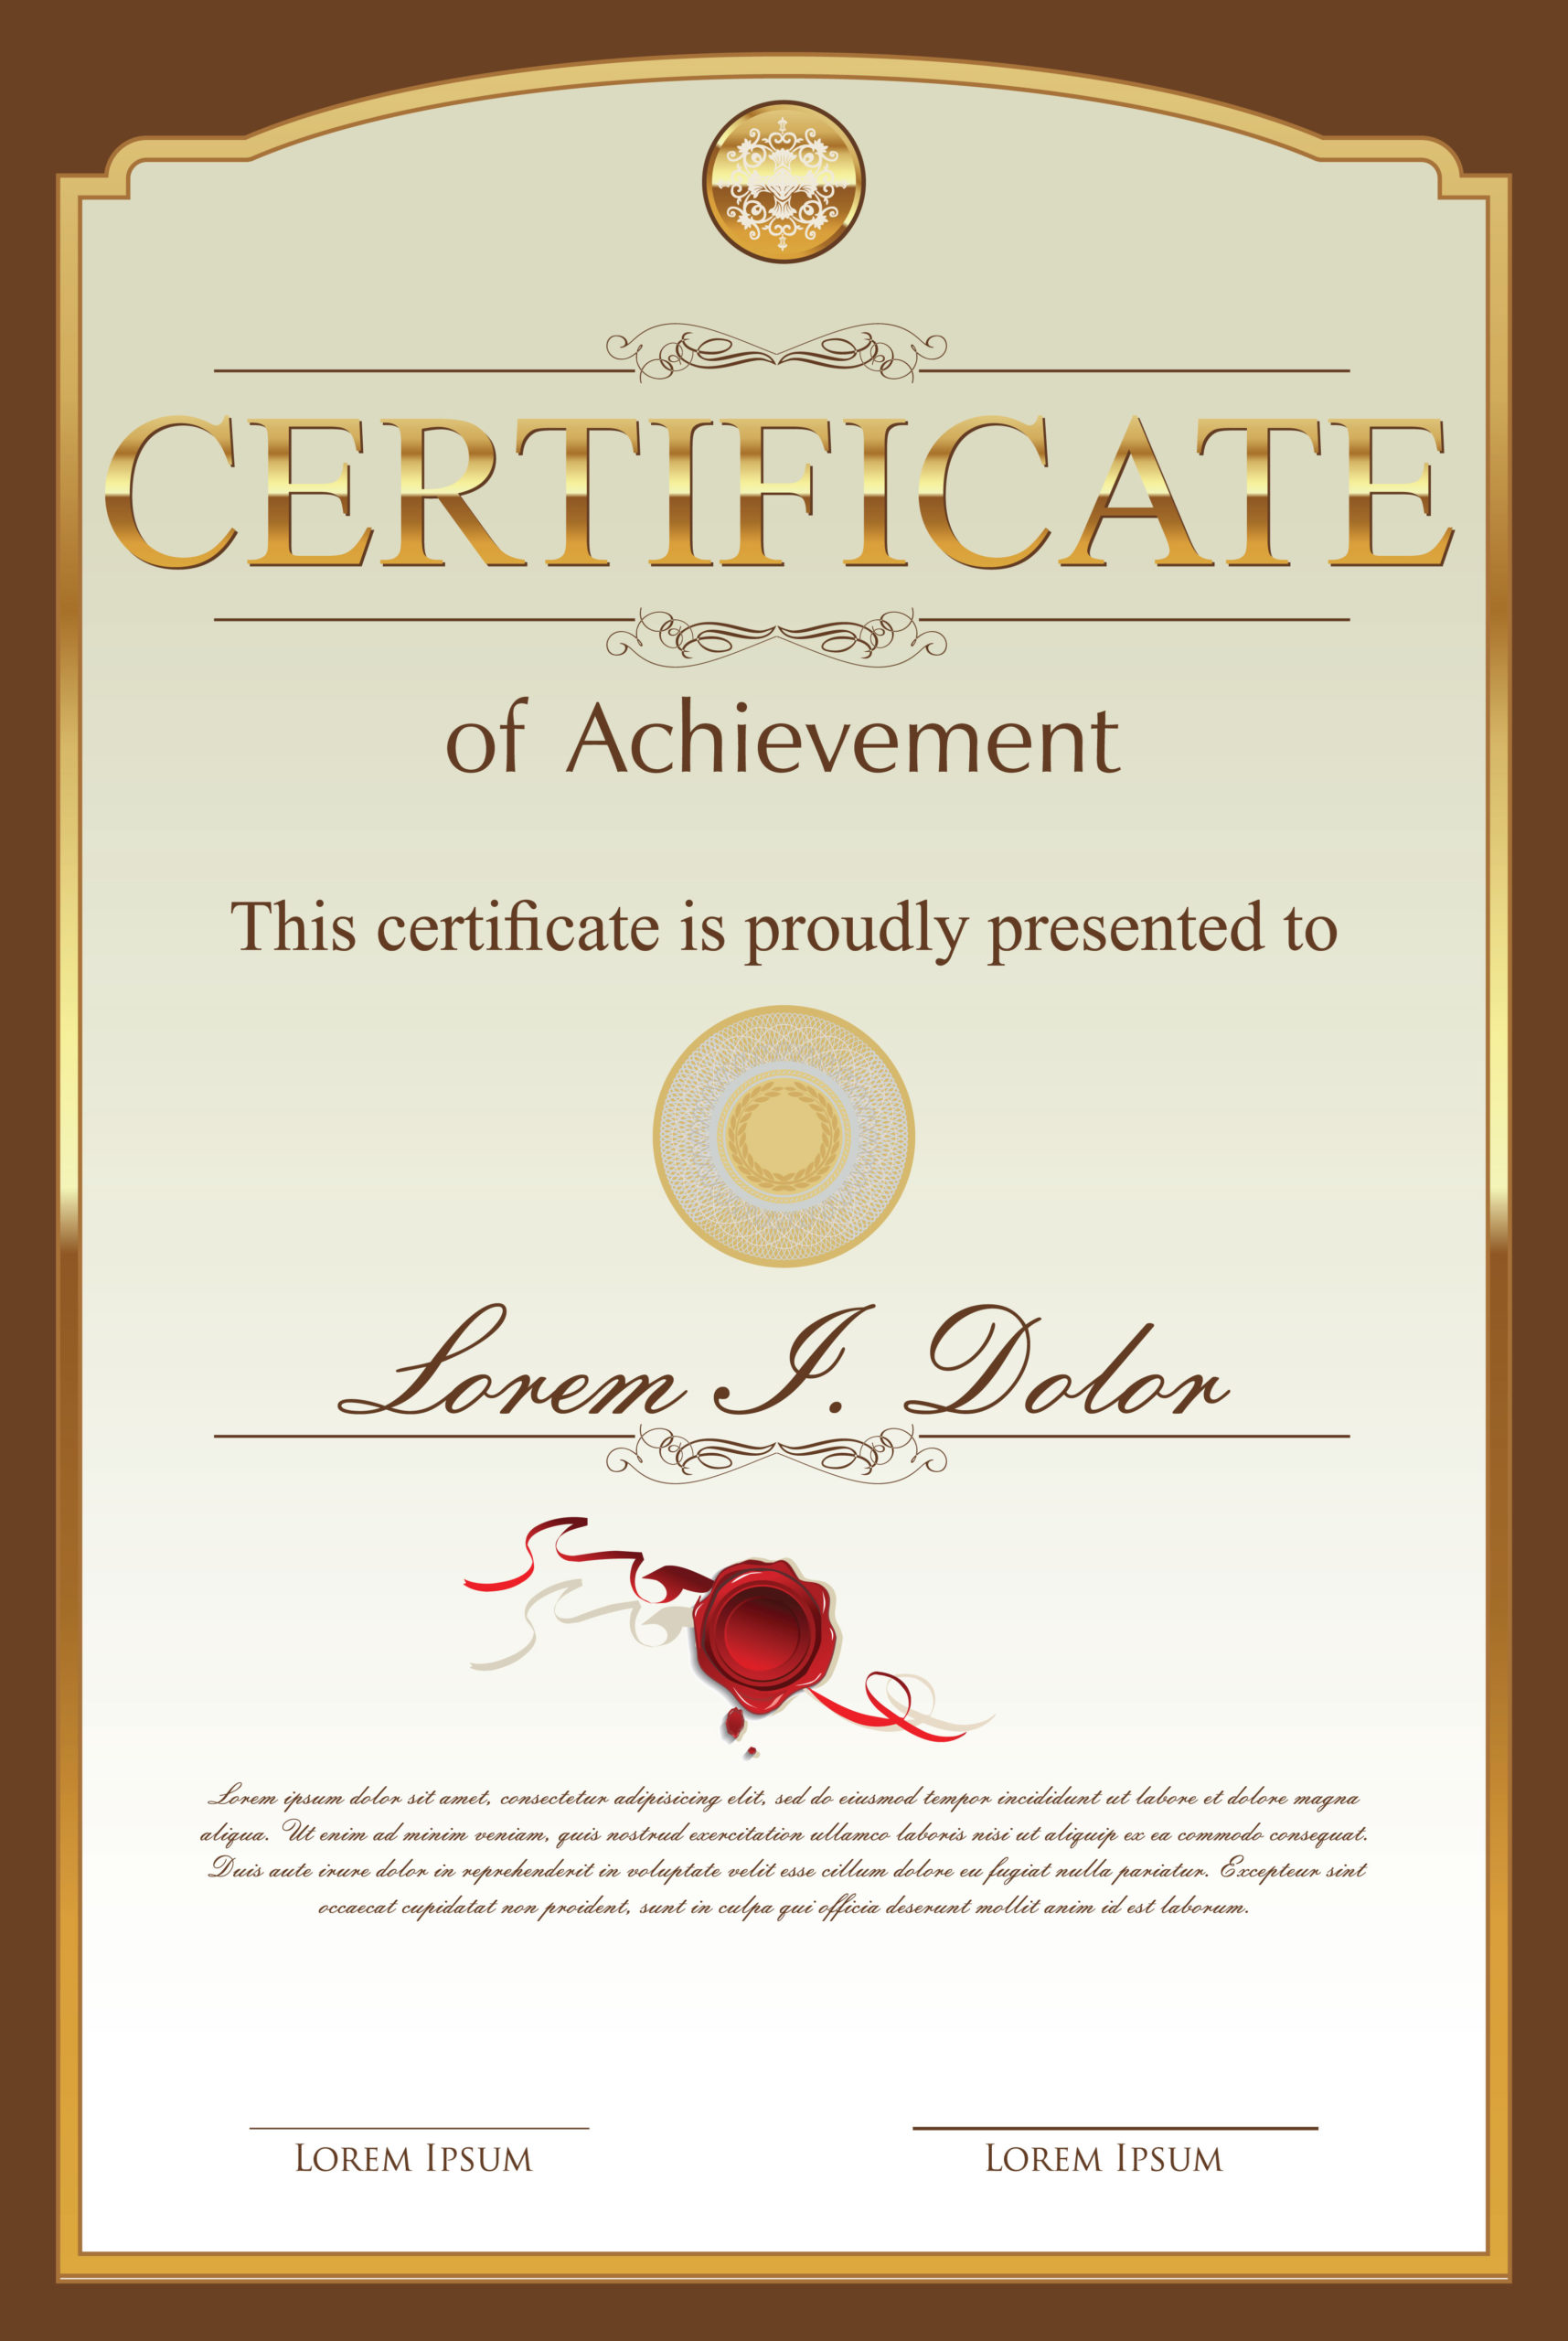 Certificate Template Download Free Vectors, Clipart Pertaining To Simple Free Art Certificate Templates